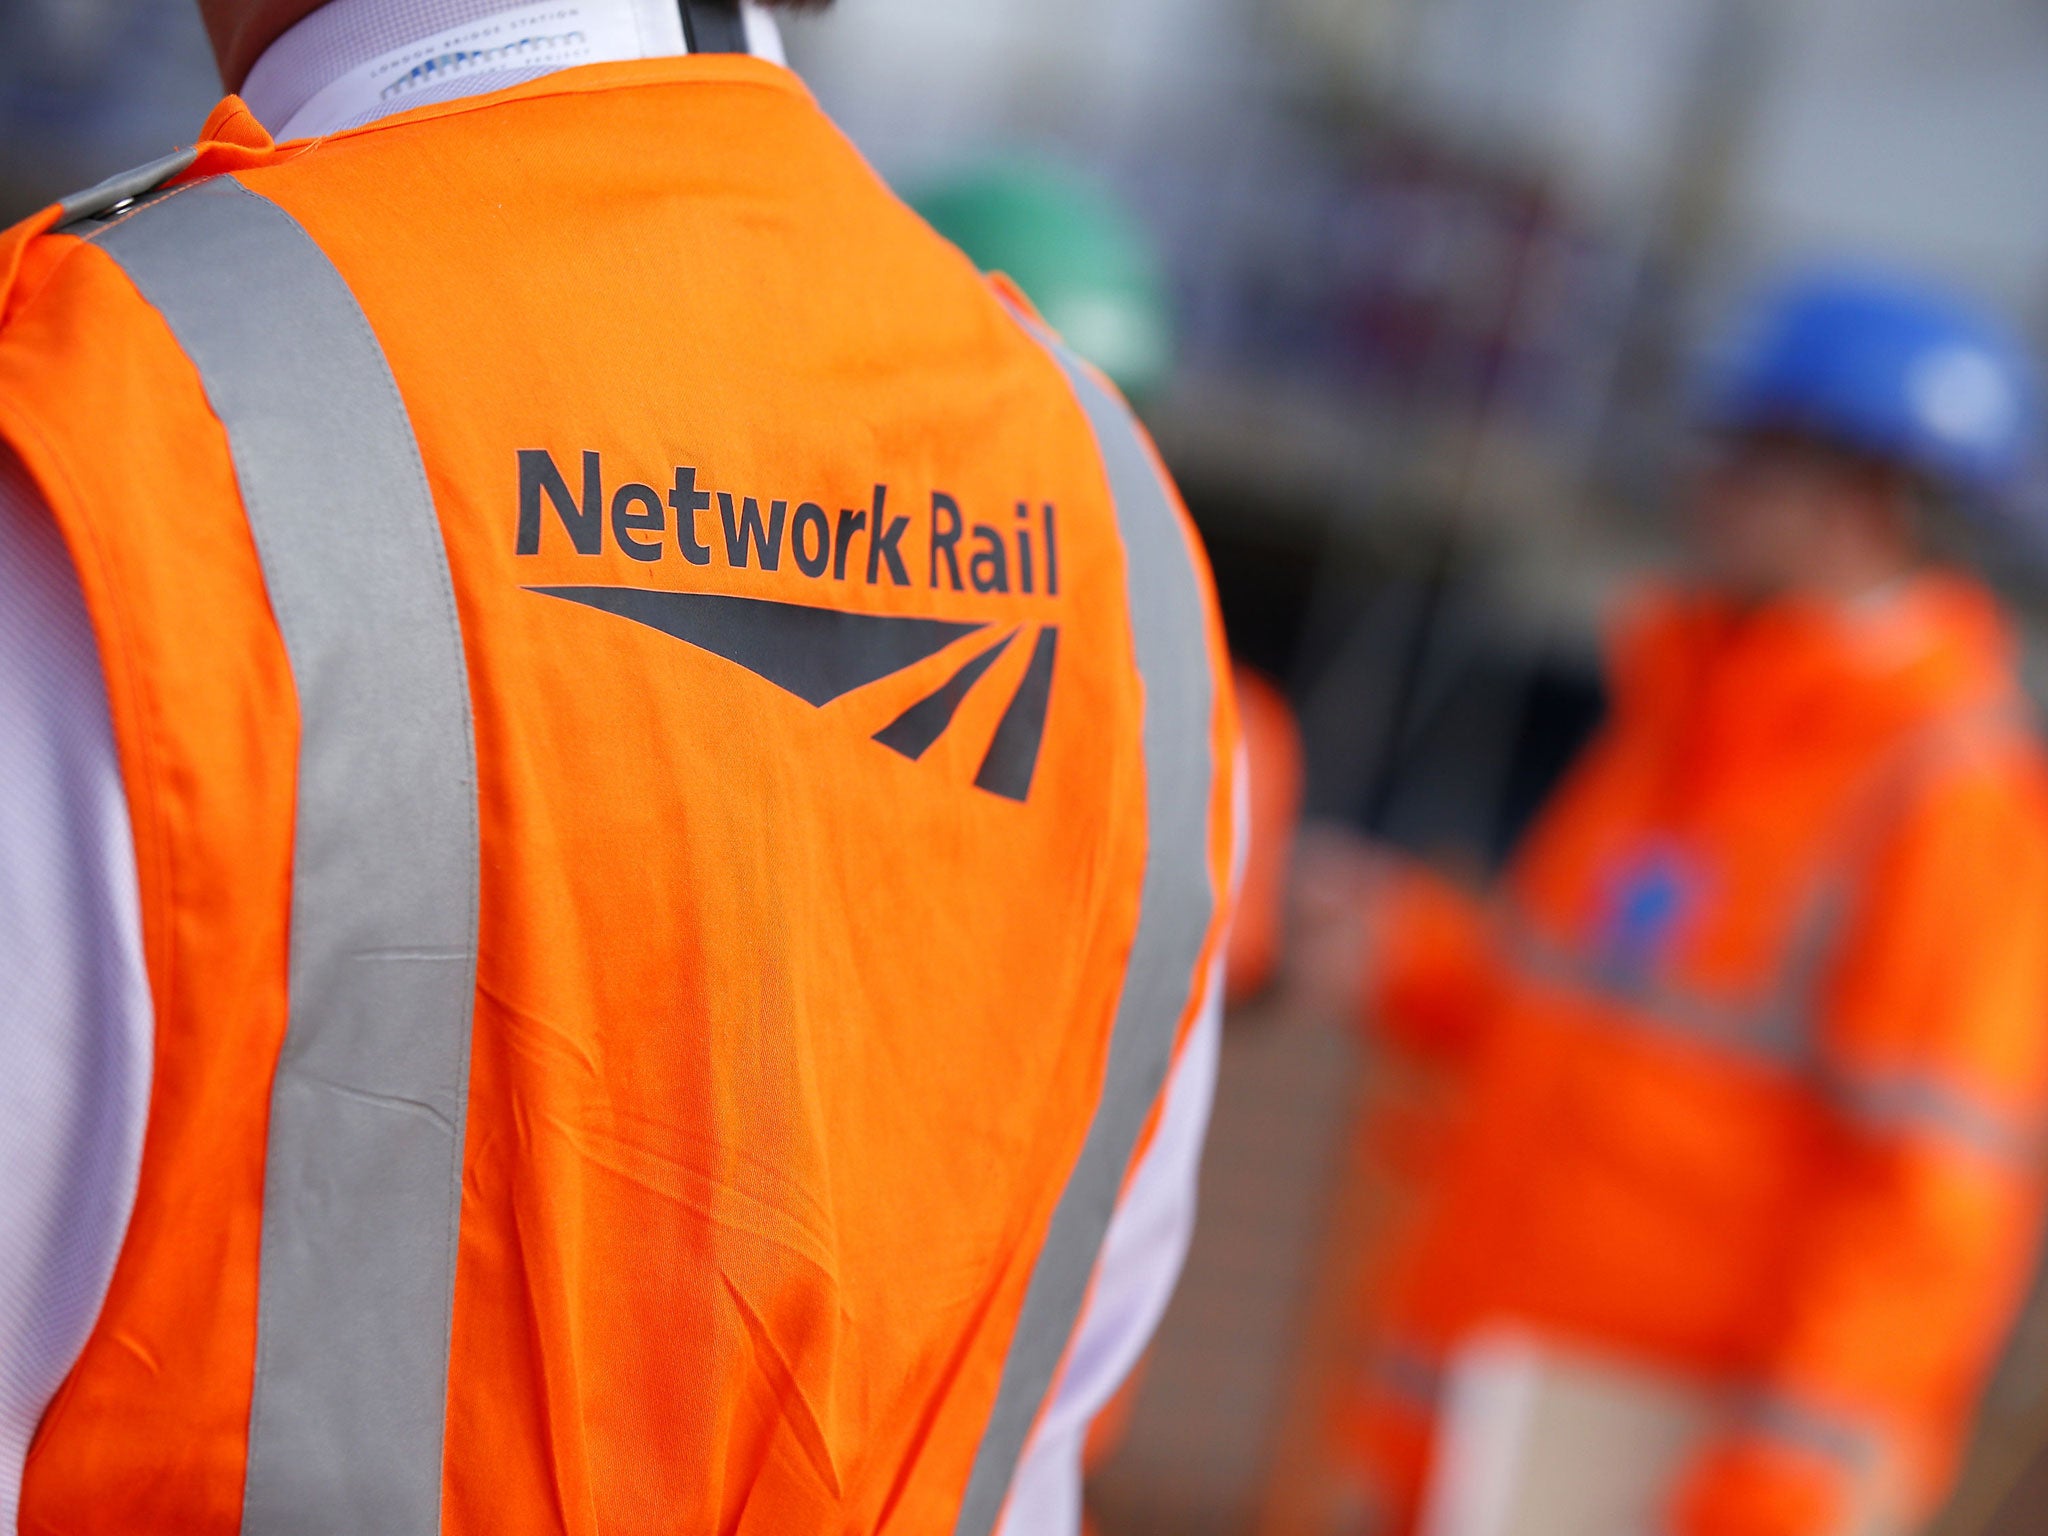 Patrick McLoughlin blamed the delays on under-performing Network Rail bosses